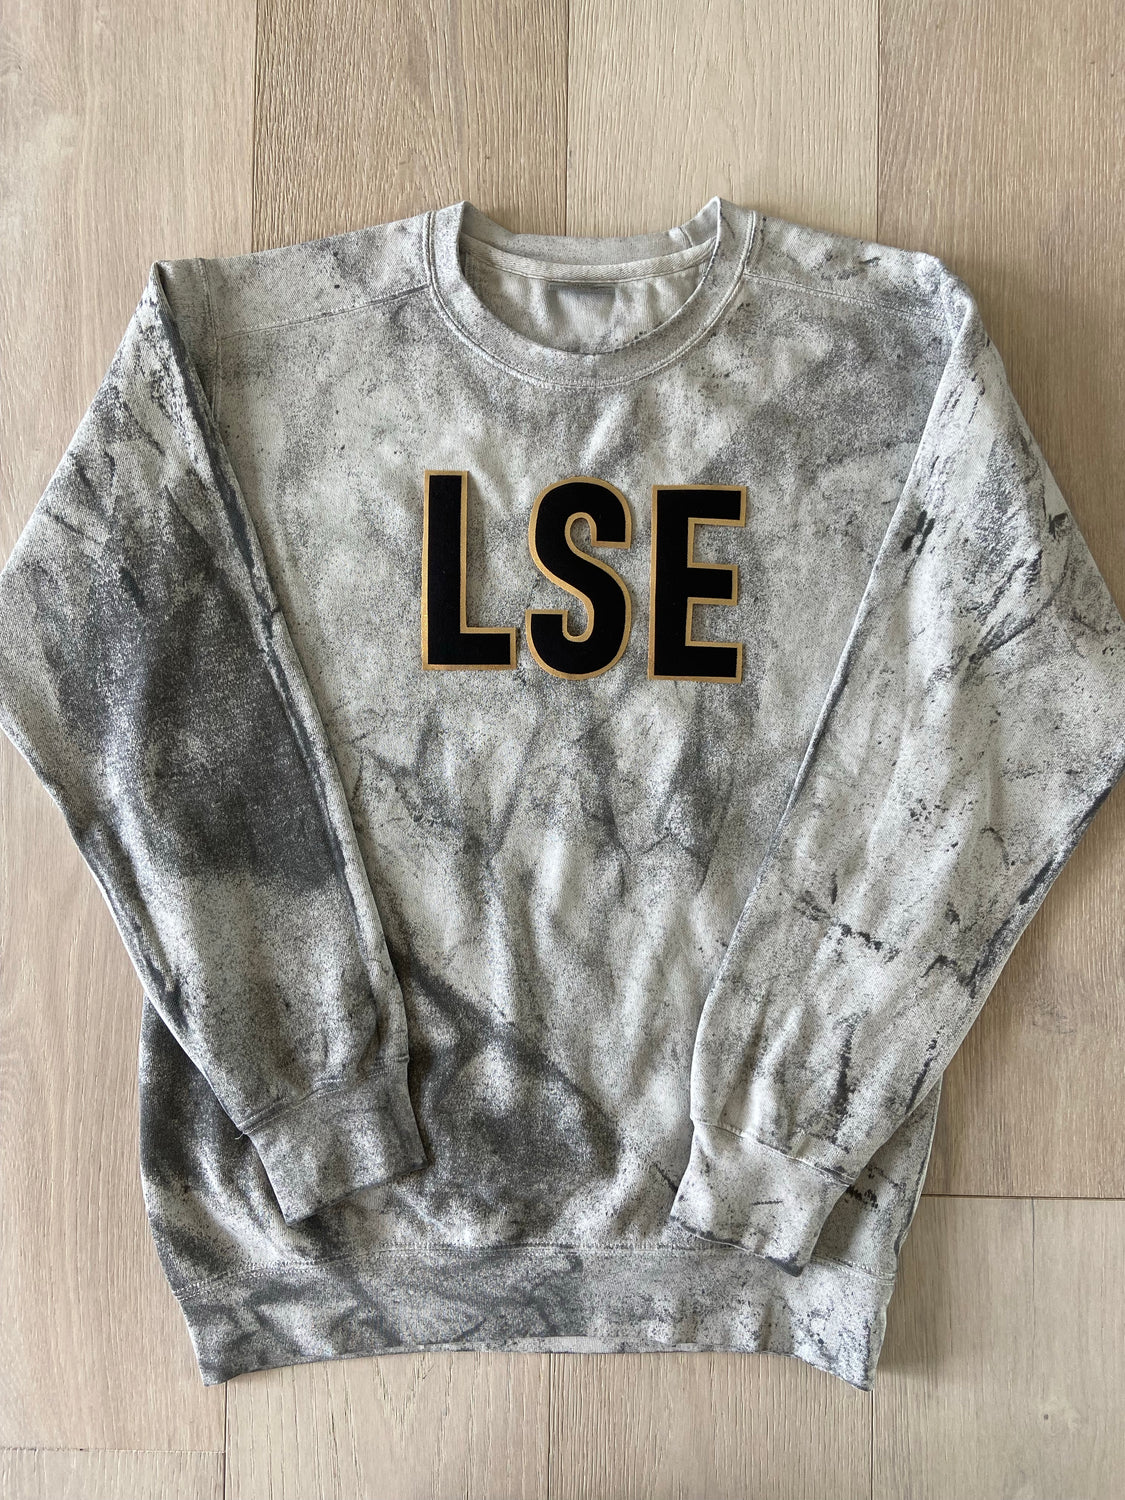 LSE - GREY DYED COMFORT COLORS CREW